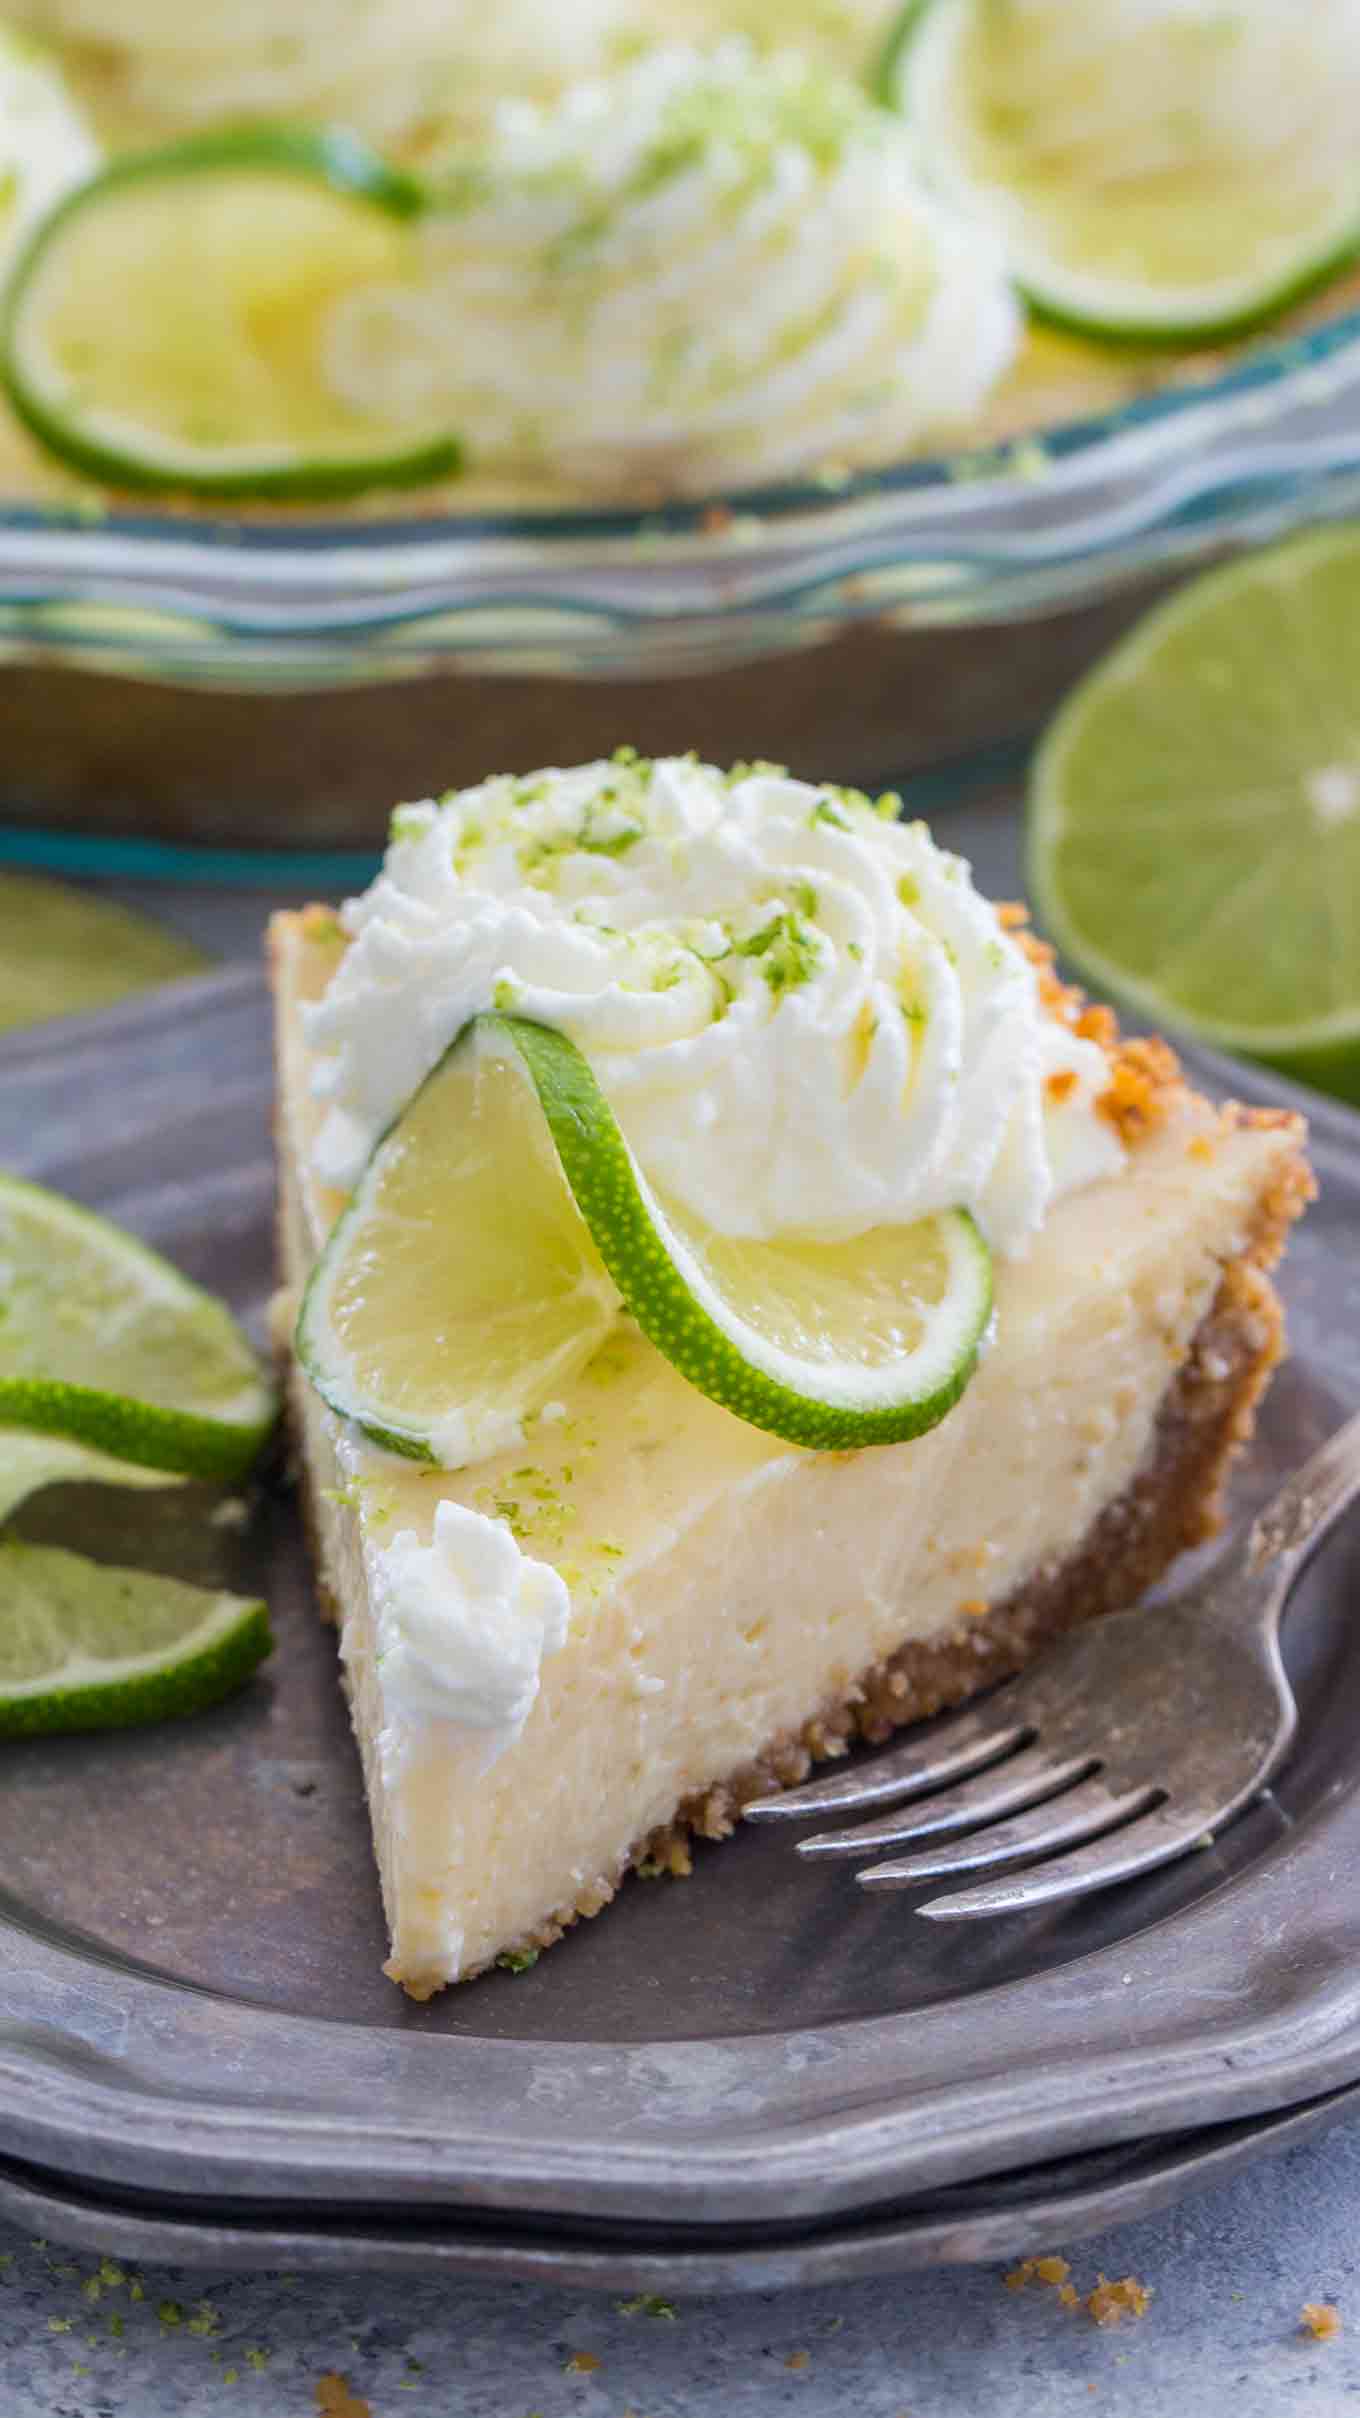 Homemade Key Lime Pie Recipe [VIDEO] - Sweet and Savory Meals